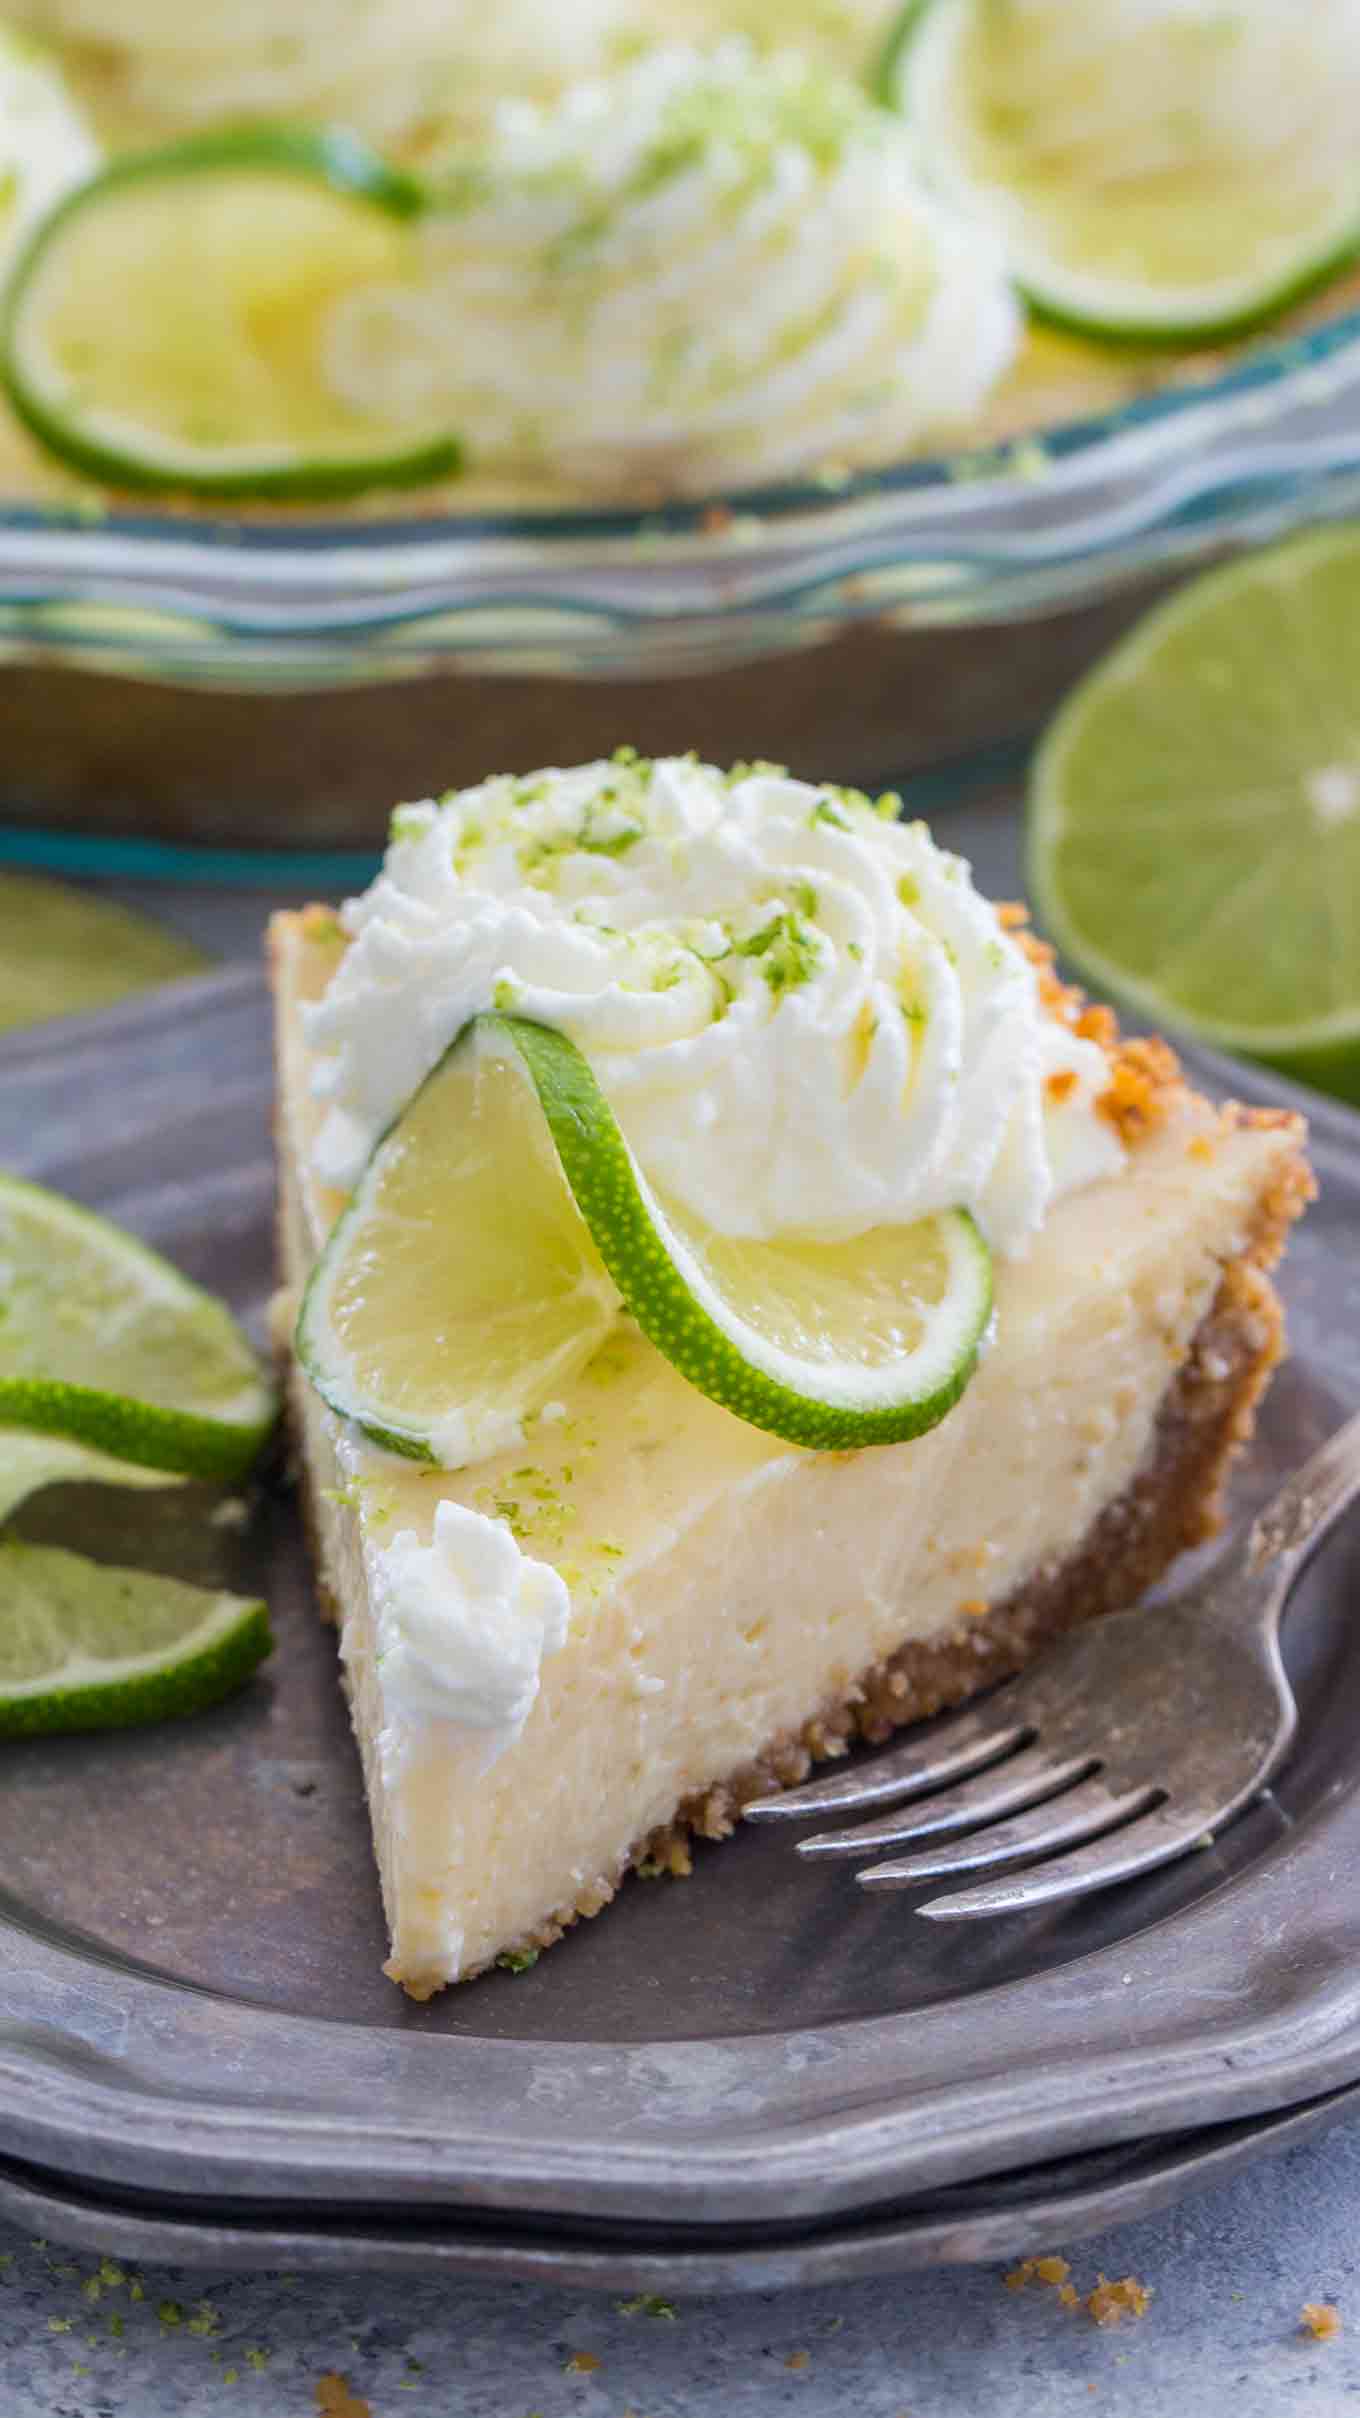 Homemade Key Lime Pie Recipe [VIDEO] - Sweet and Savory Meals